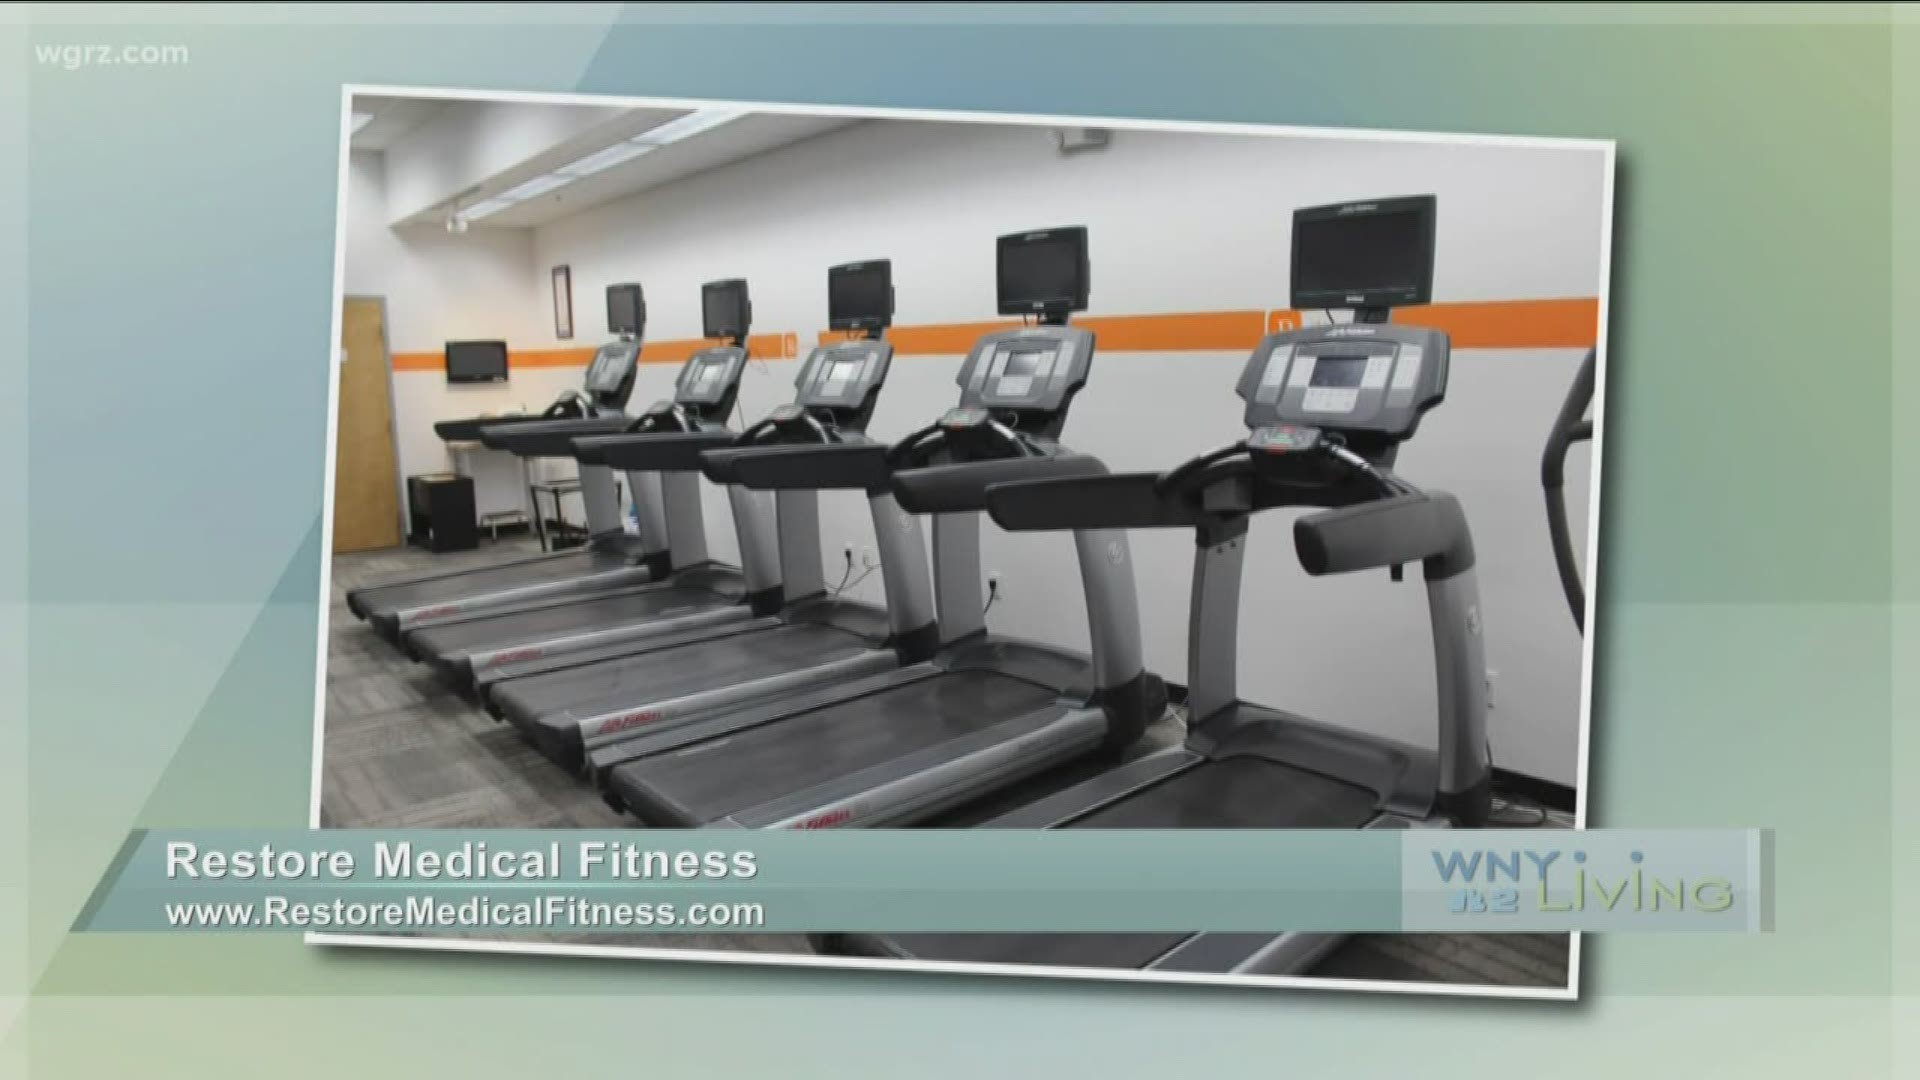 December 14 - Restore Medical Fitness (THIS VIDEO IS SPONSORED BY RESTORE MEDICAL FITNESS)